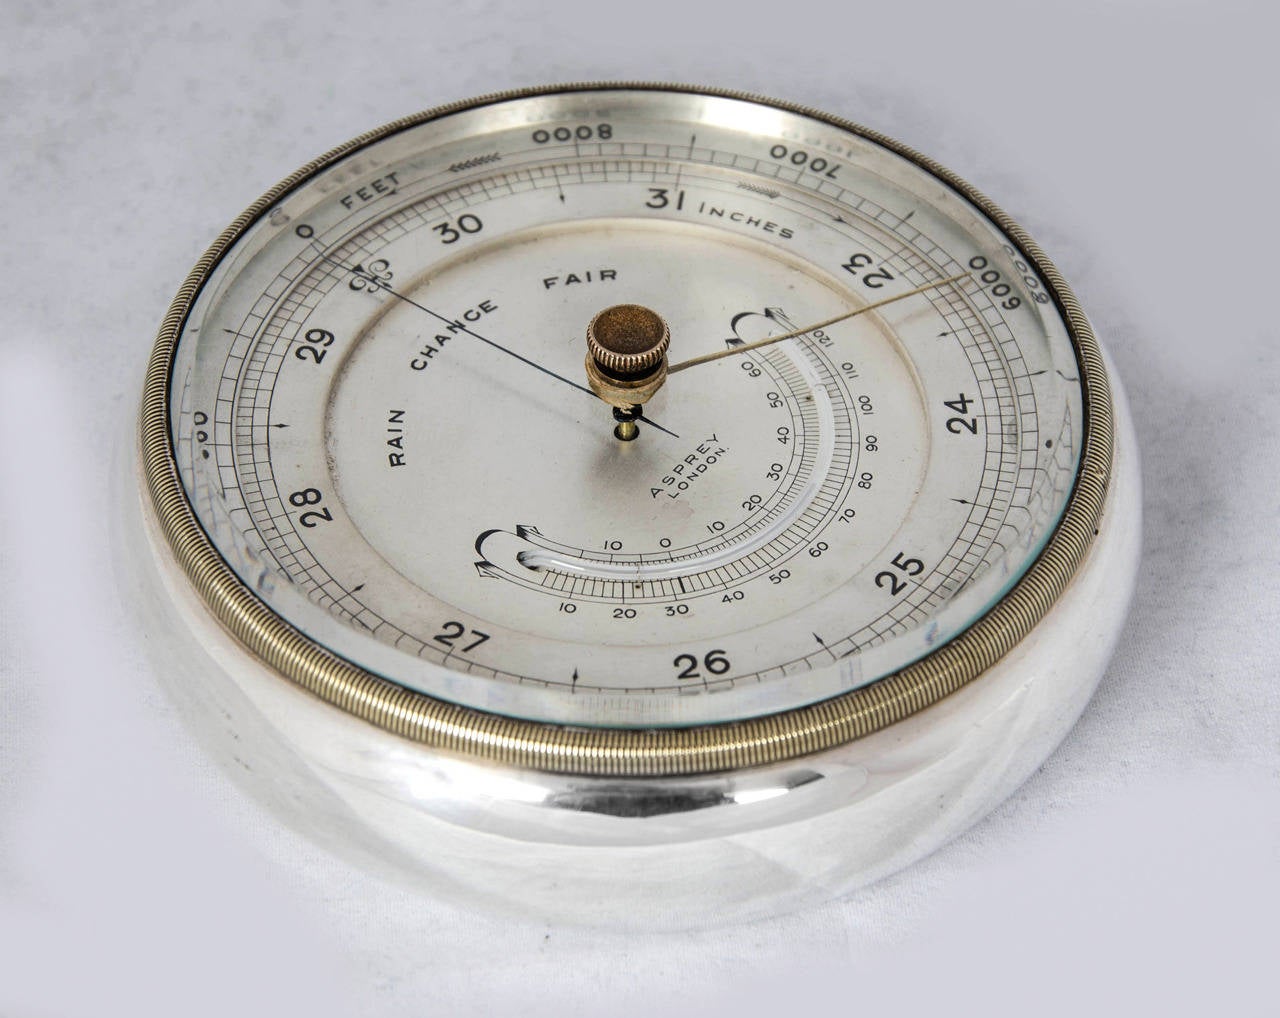 An Asprey & Co.Sterling Silver Barometer, made in London, 1920.
Suitable for a desk, but has the option of being hung on the wall by a sliding ring that fits flush to the edge when not in use.
Diameter is 4